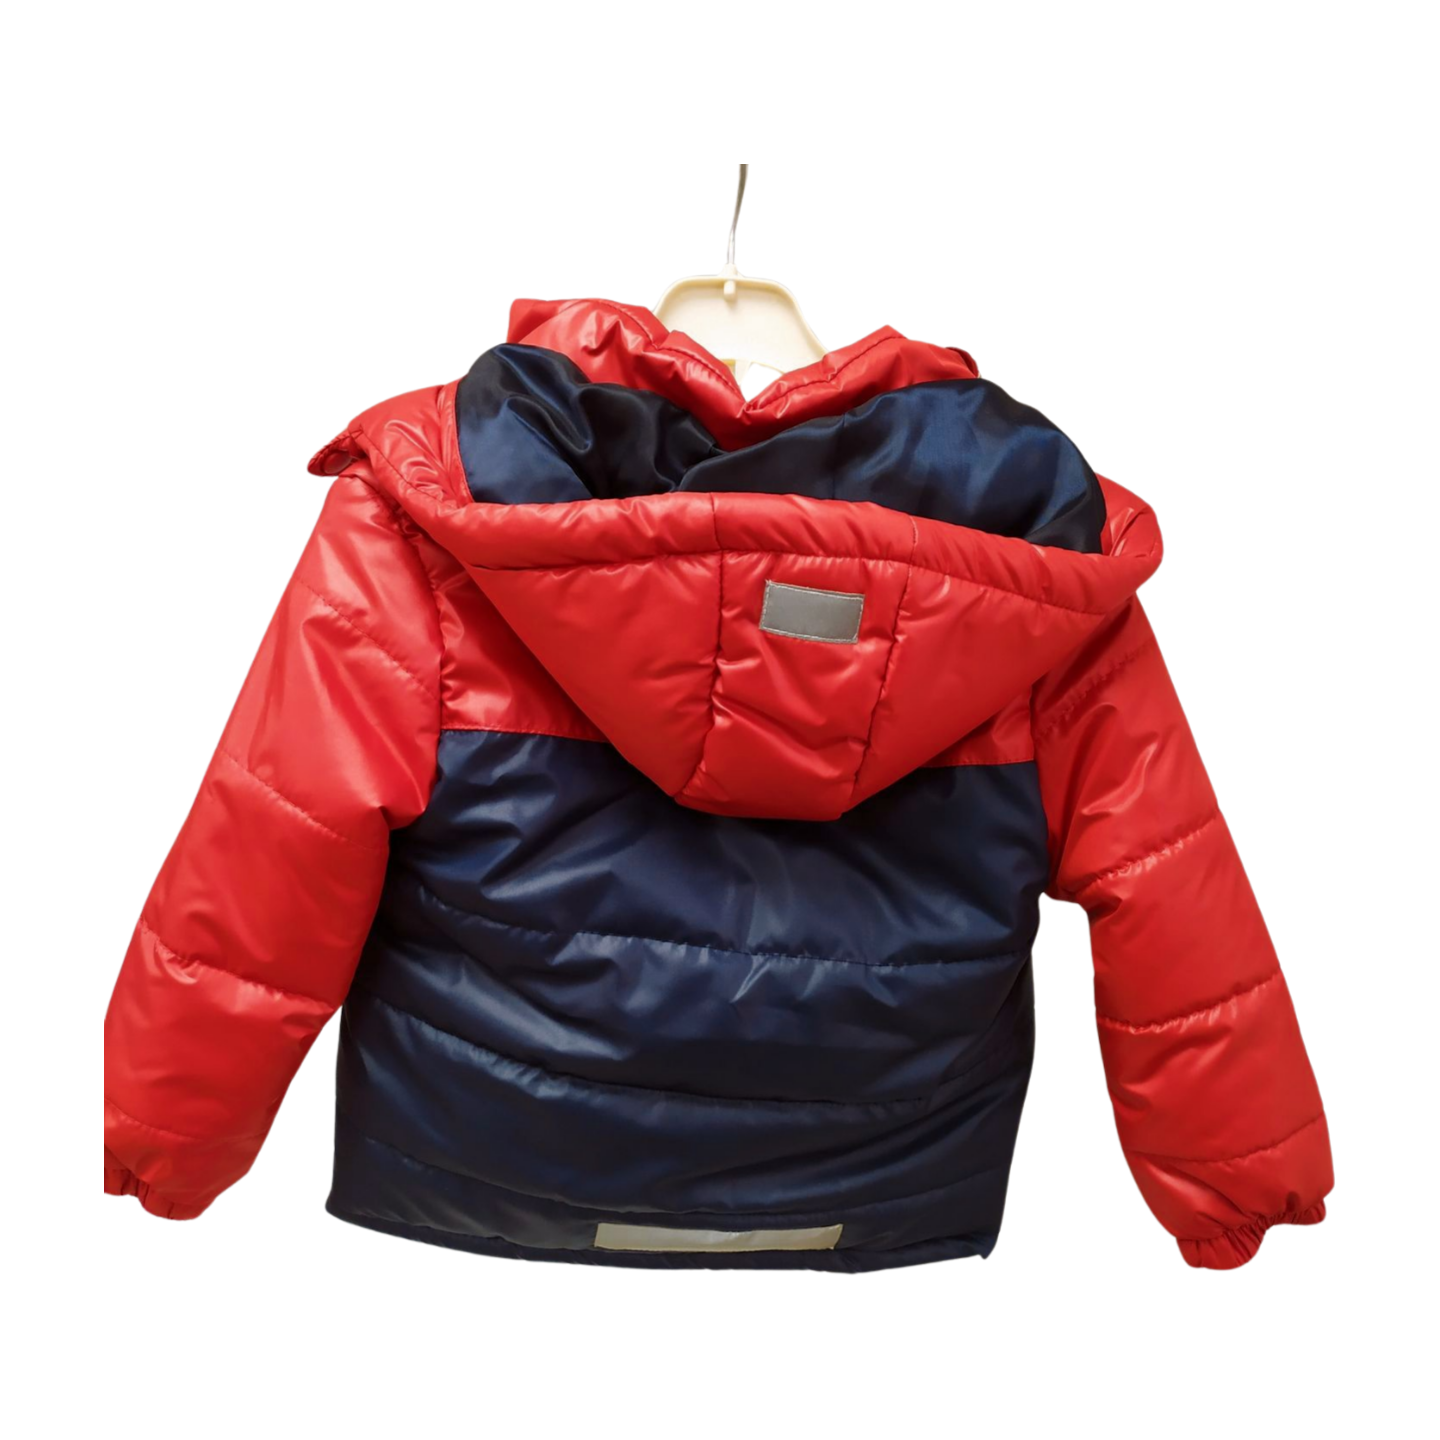 Twilight Glide Reversible Jacket for 2 to 4 years